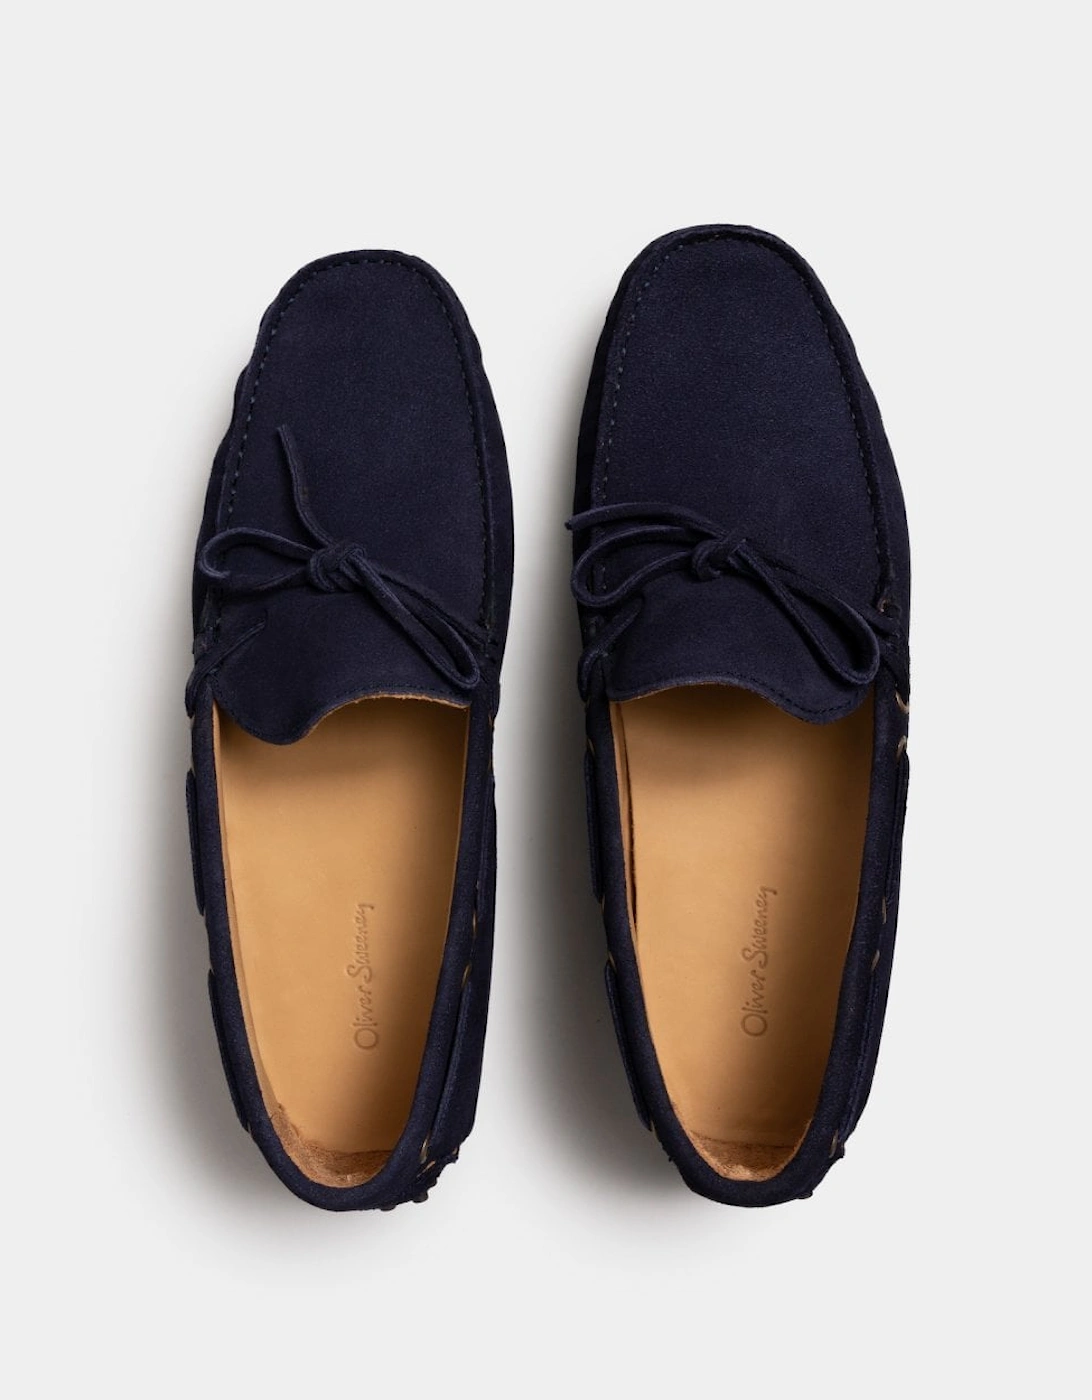 Lastres Suede Mens Driving Shoes